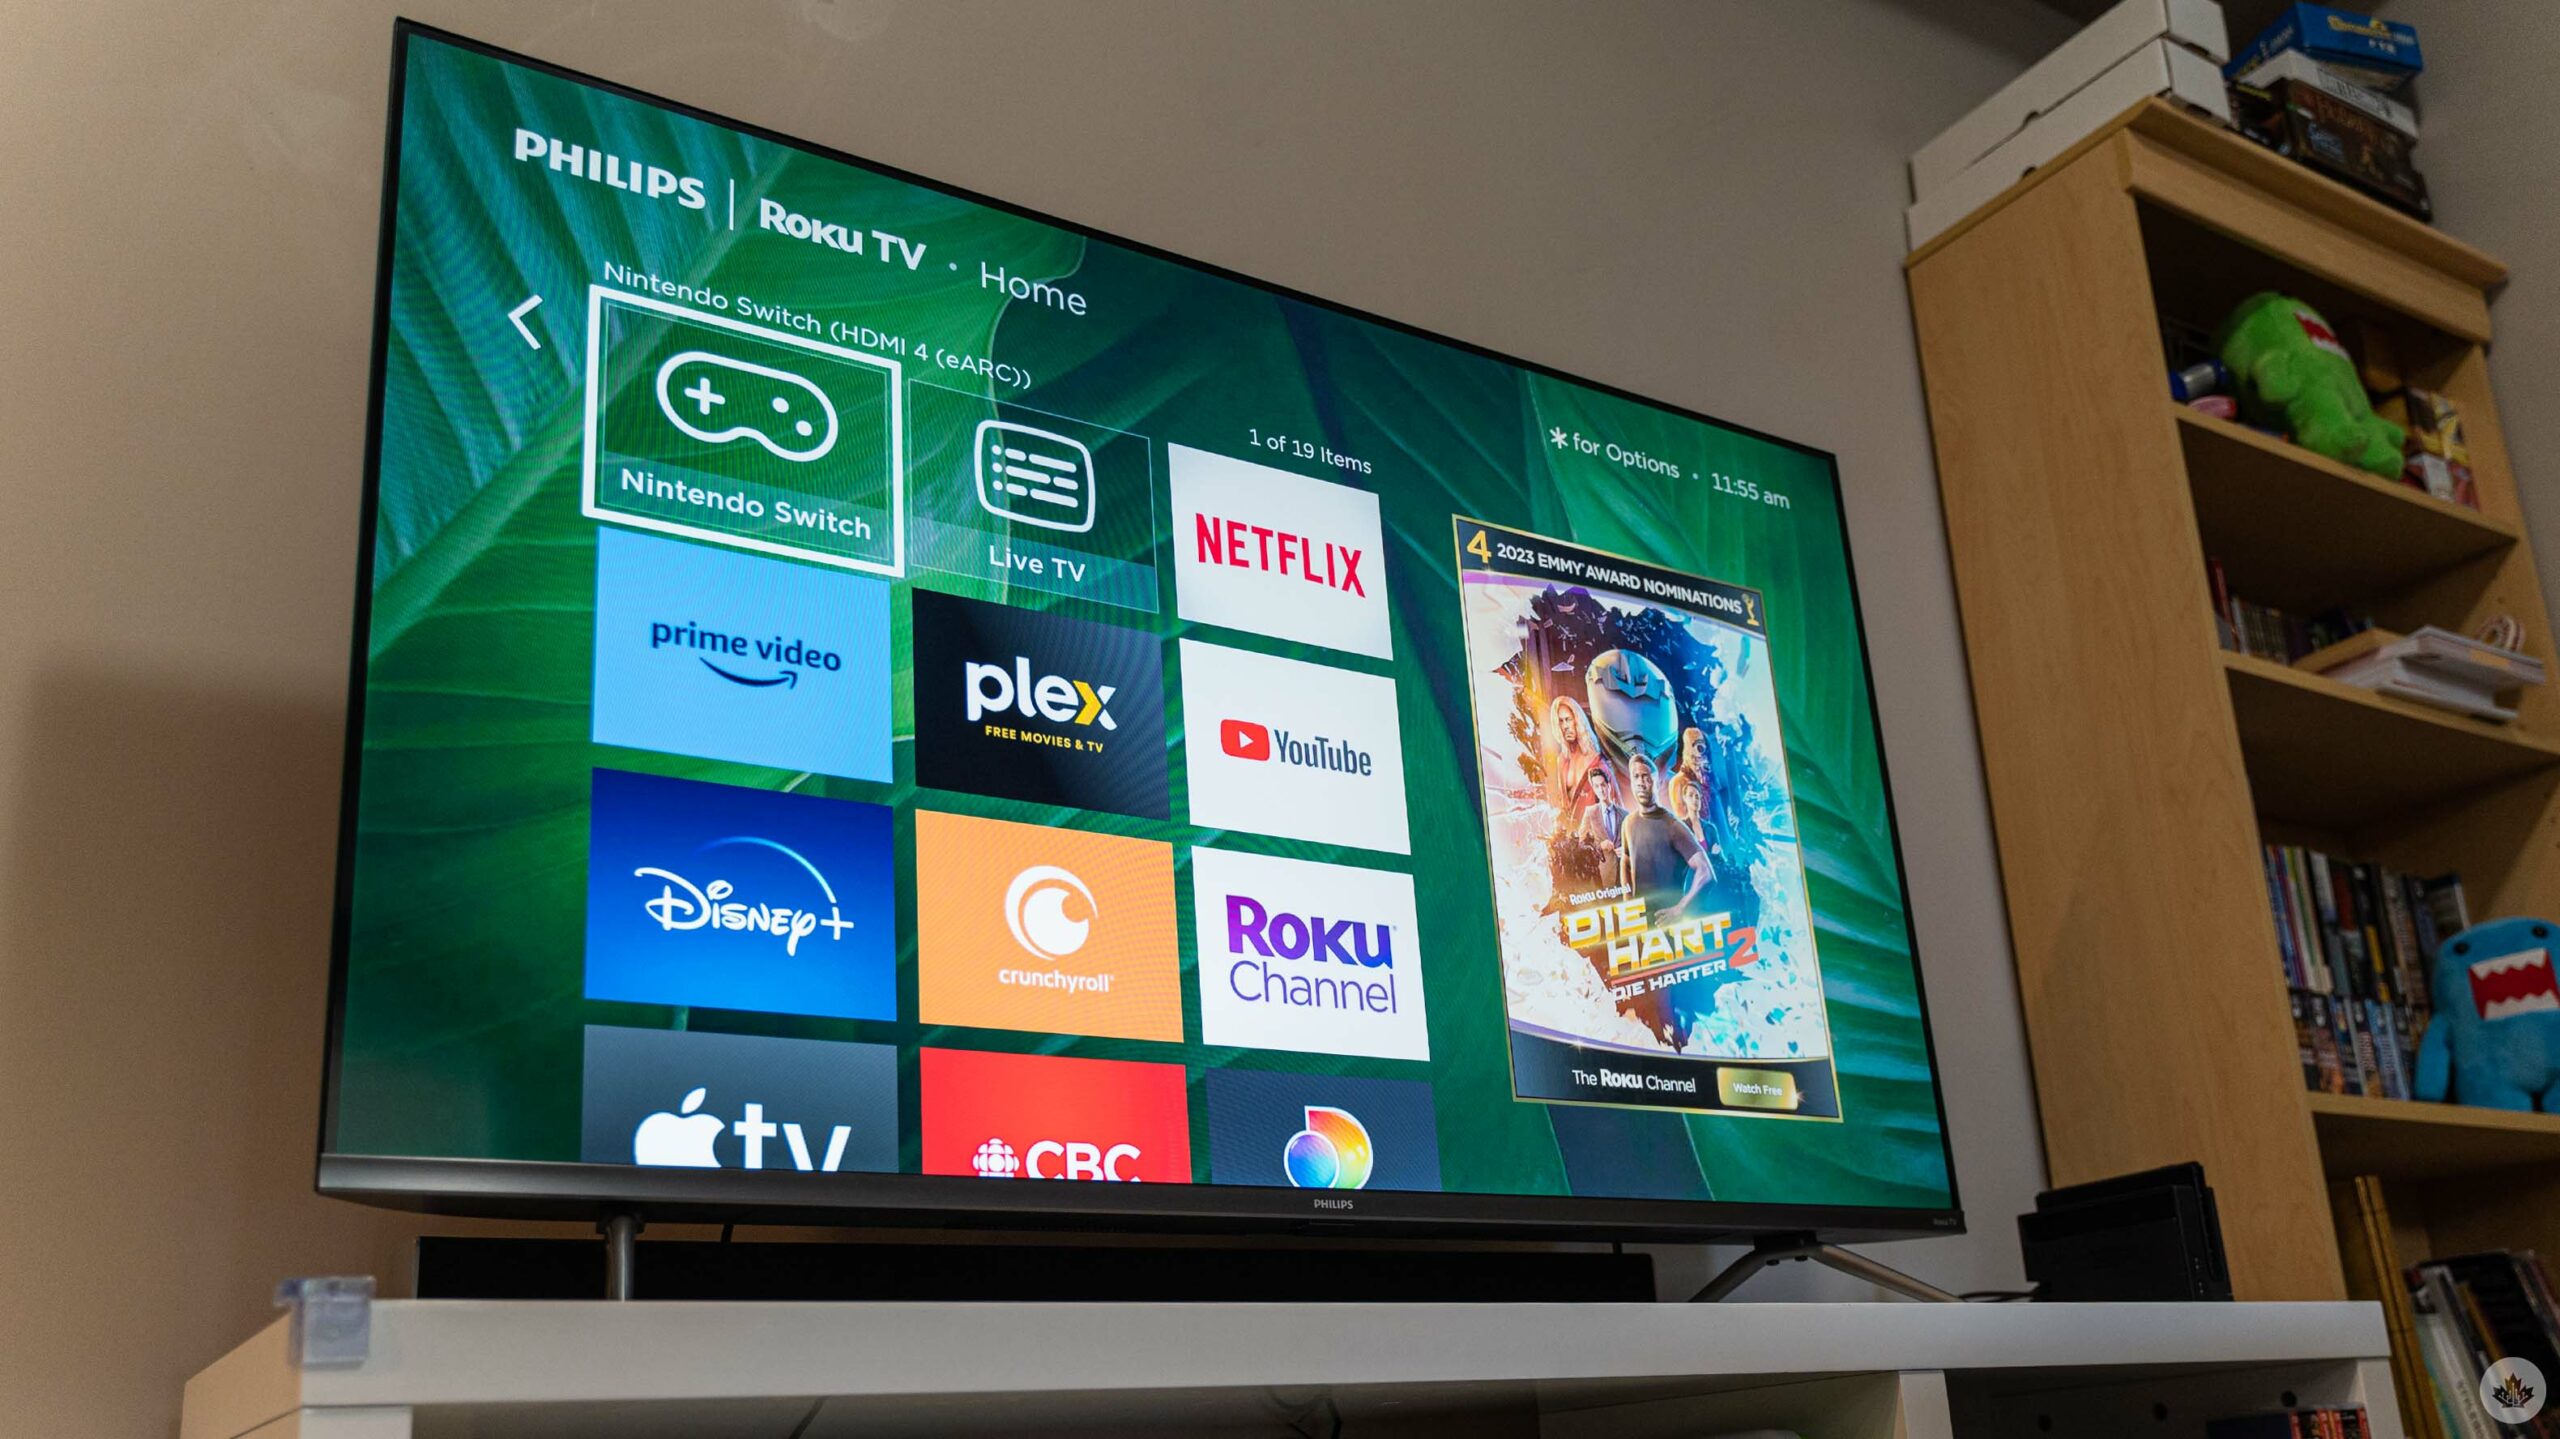 I tried Philips' new OLED TVs with built-in Dolby Atmos sound, and they're  dazzling